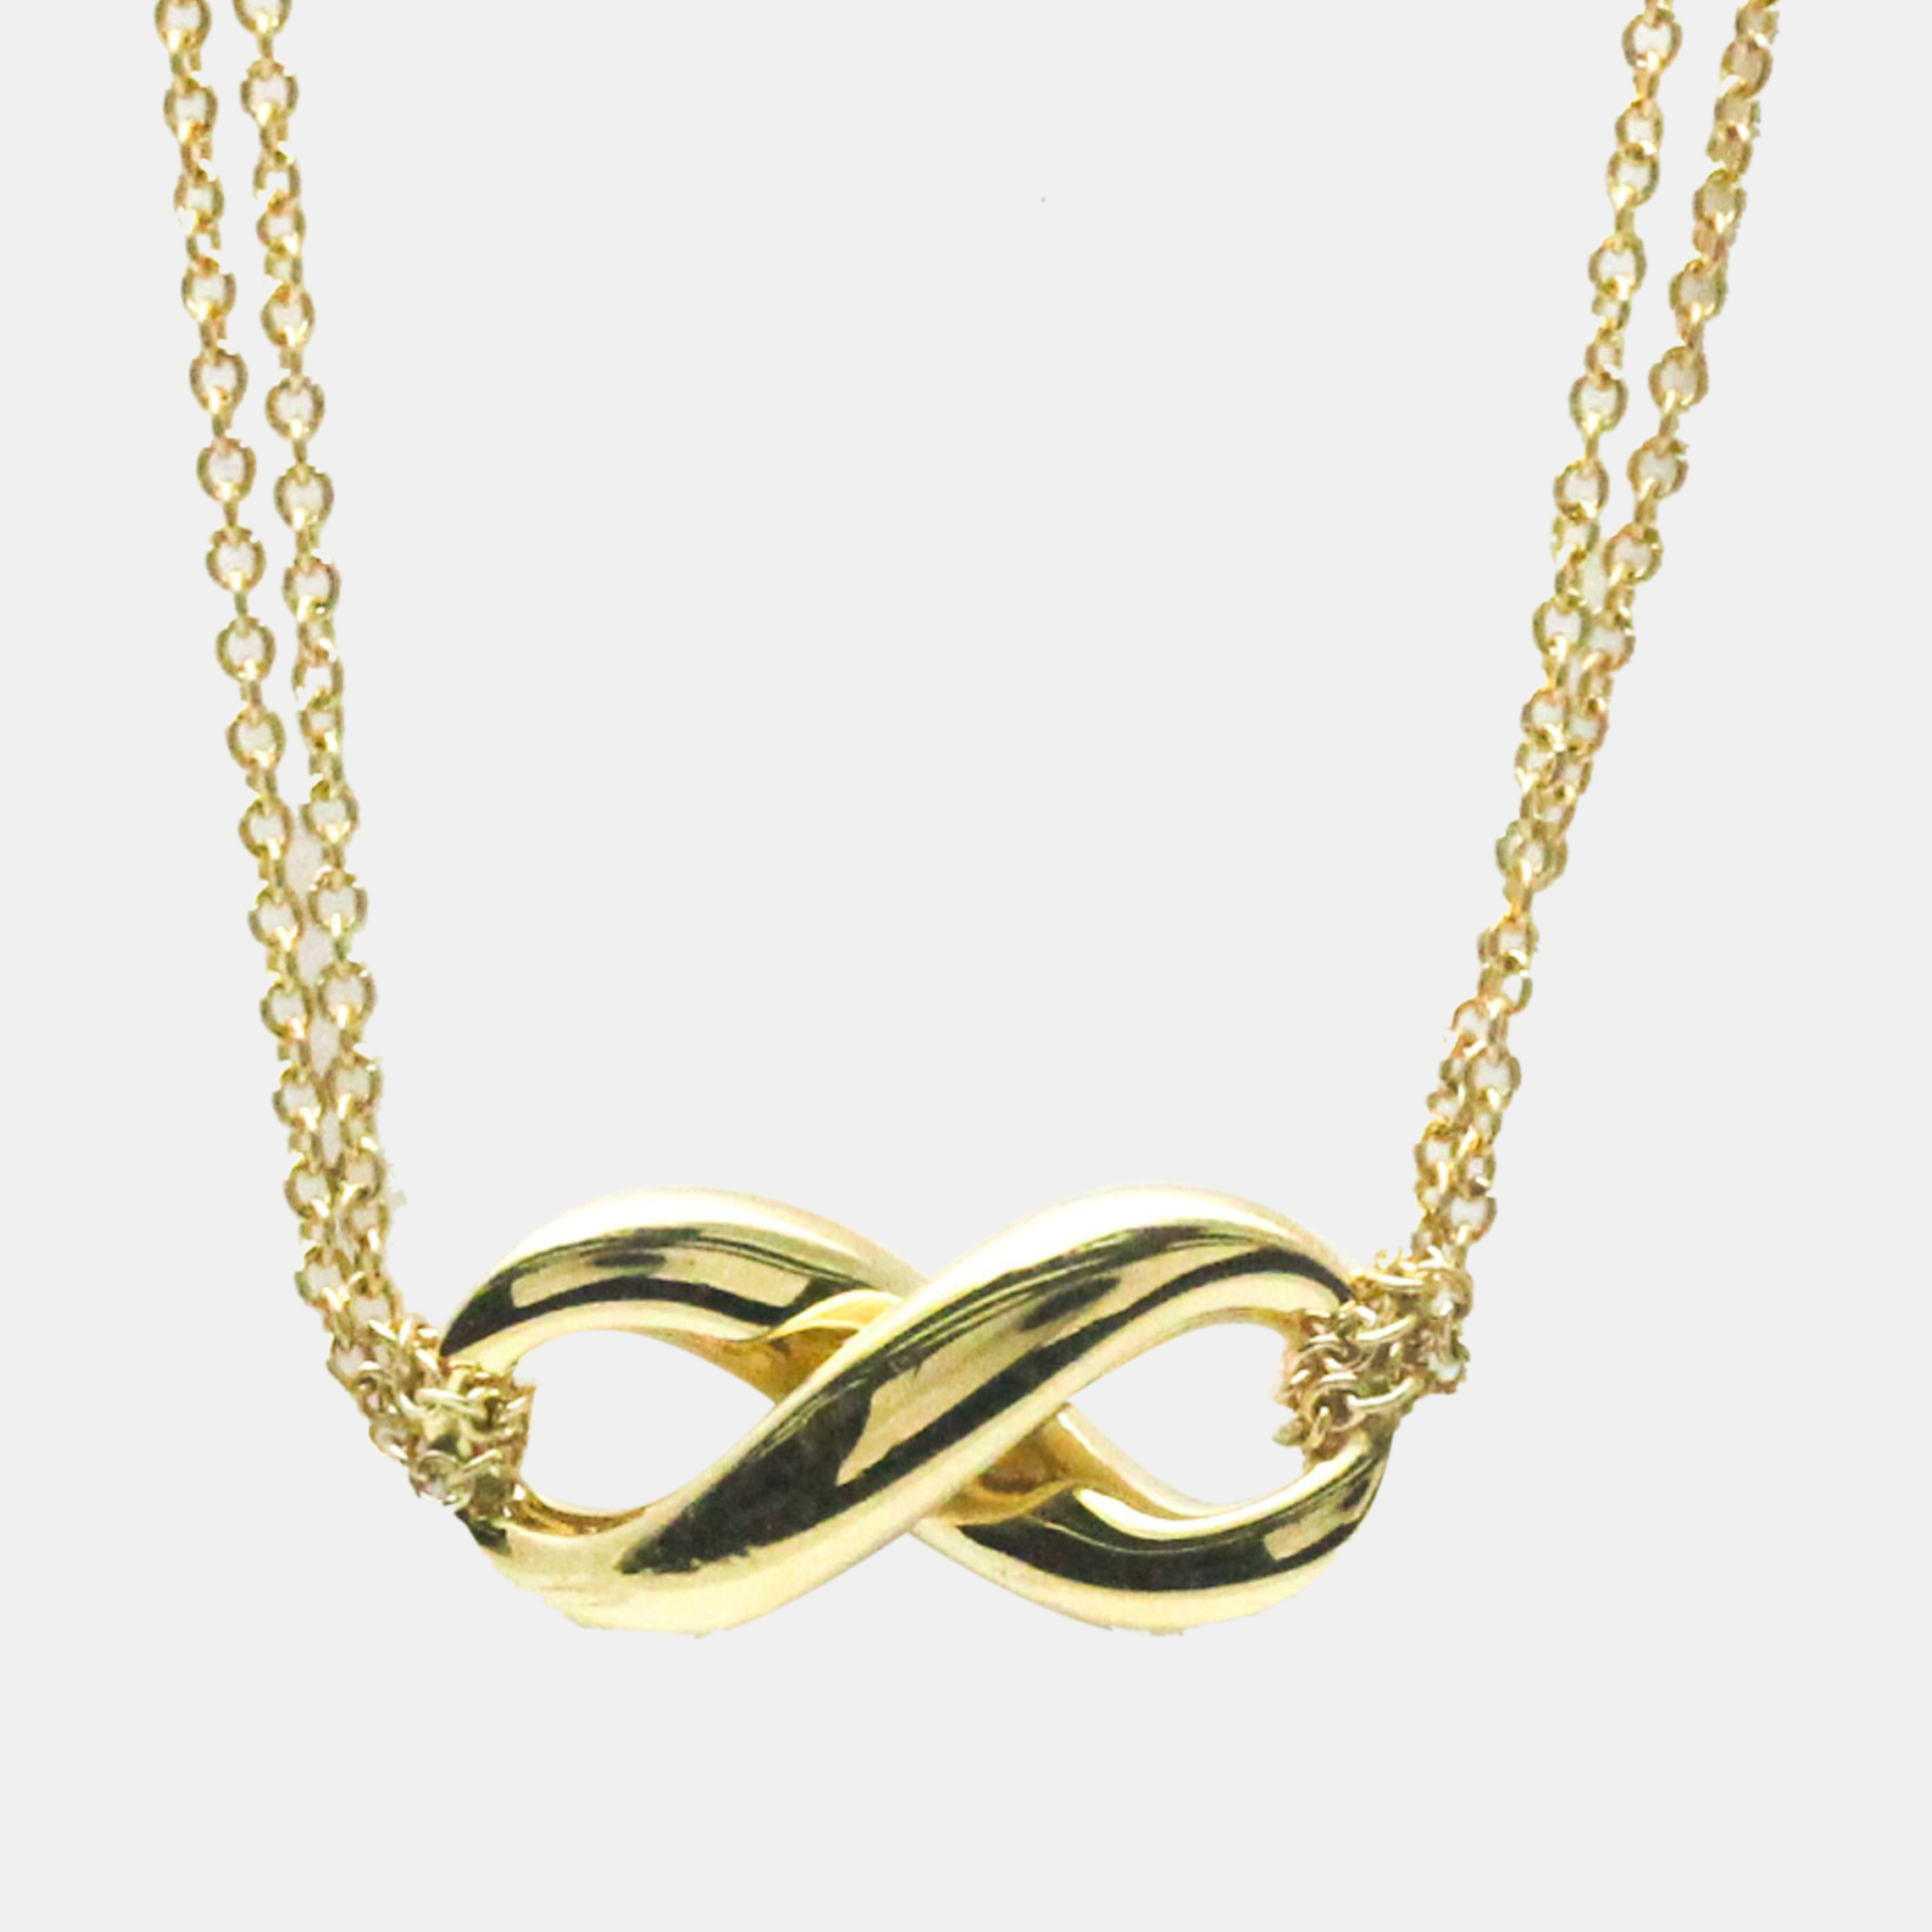 Pre-owned Tiffany & Co 18k Yellow Gold Infinity Pendant Necklace